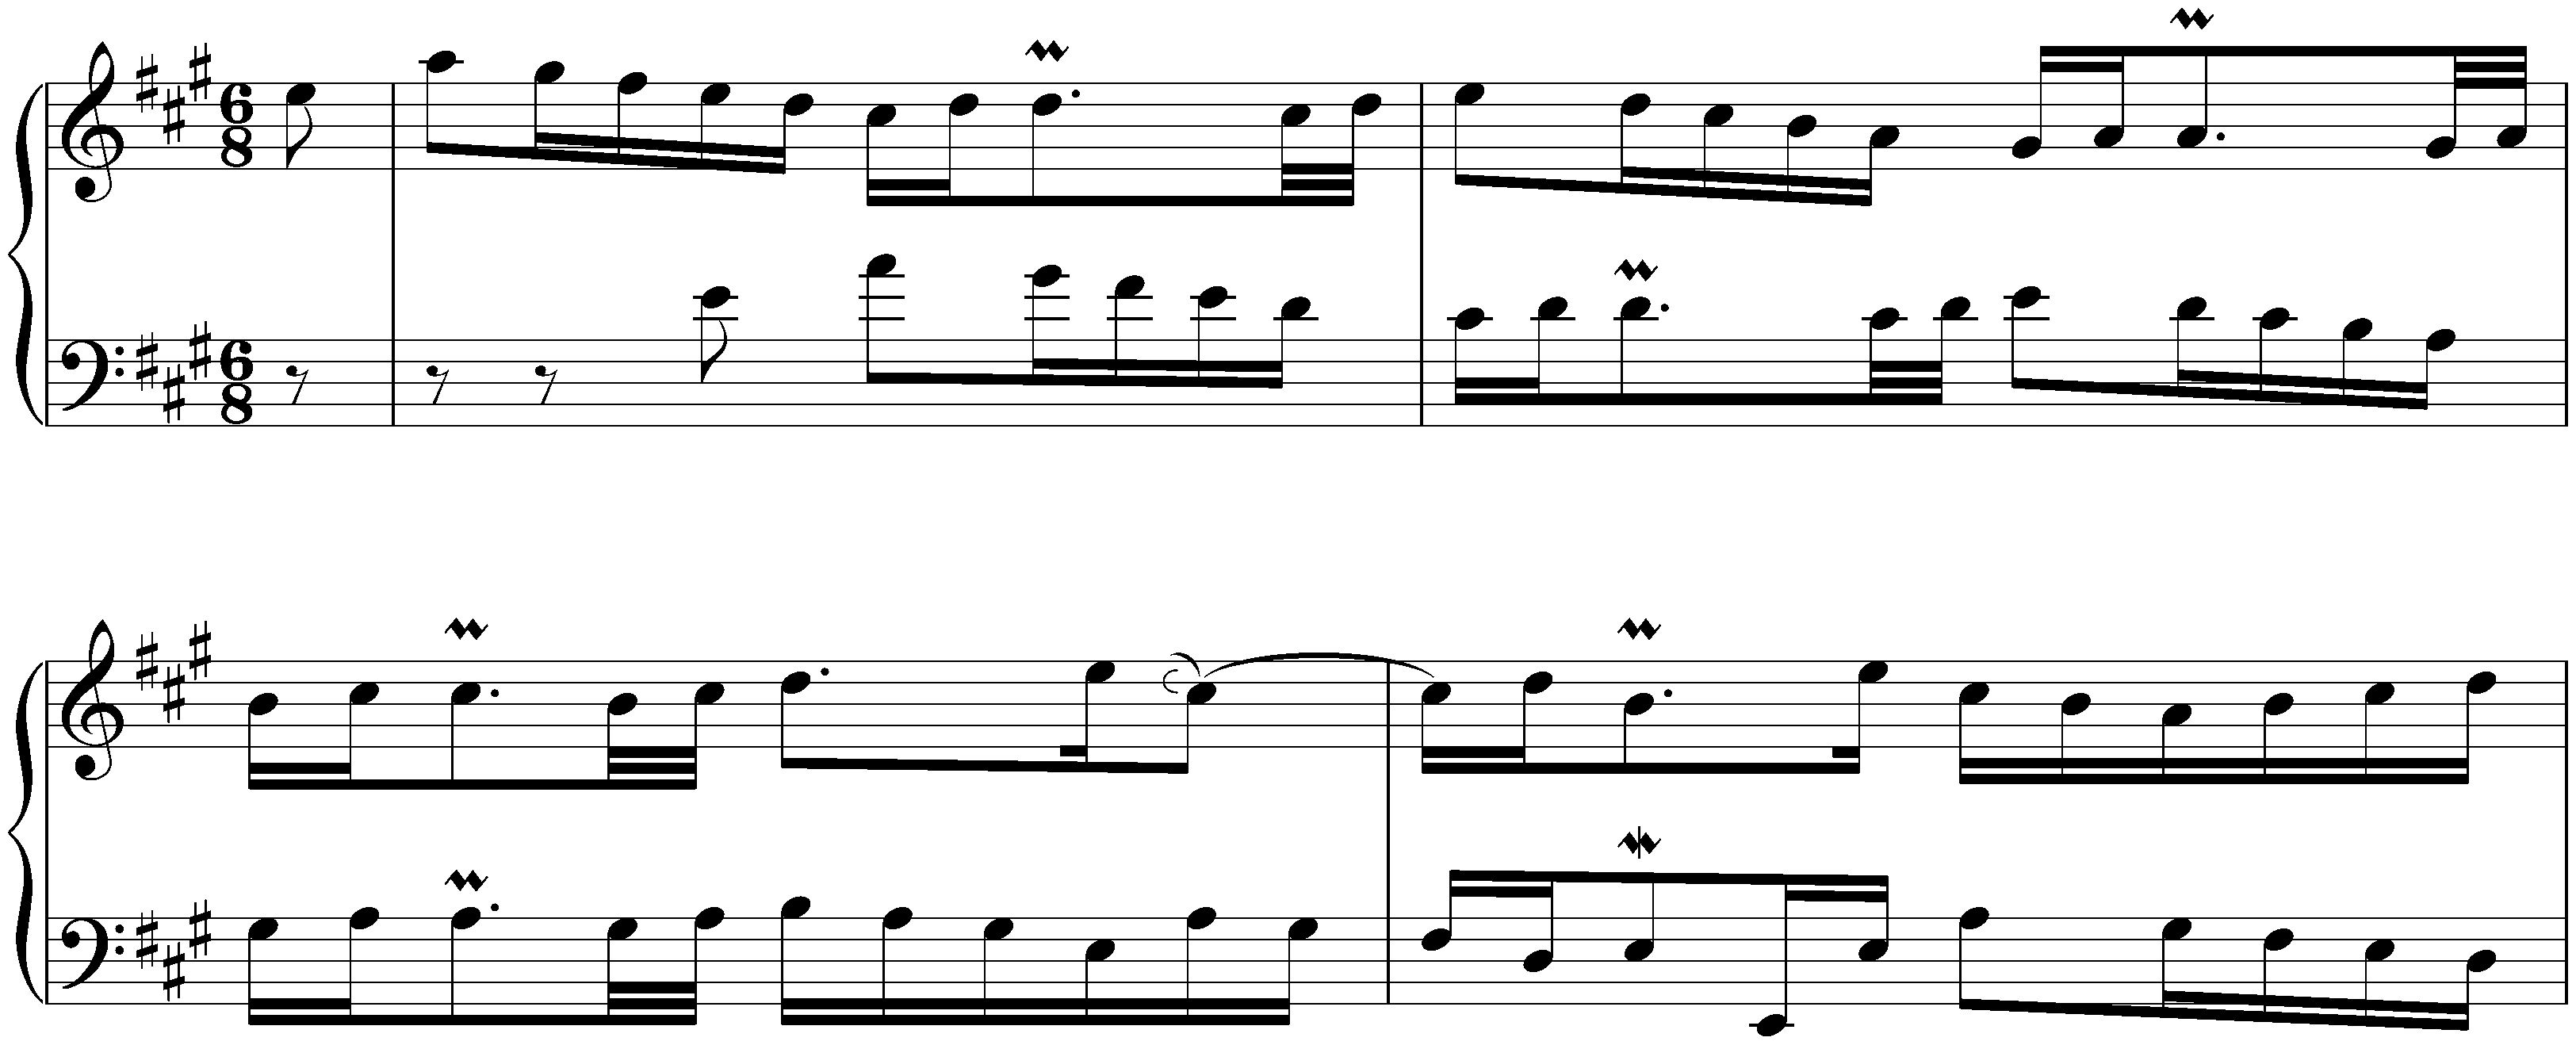 English Suite no. 1 in A major, BWV 806; 7. Gigue